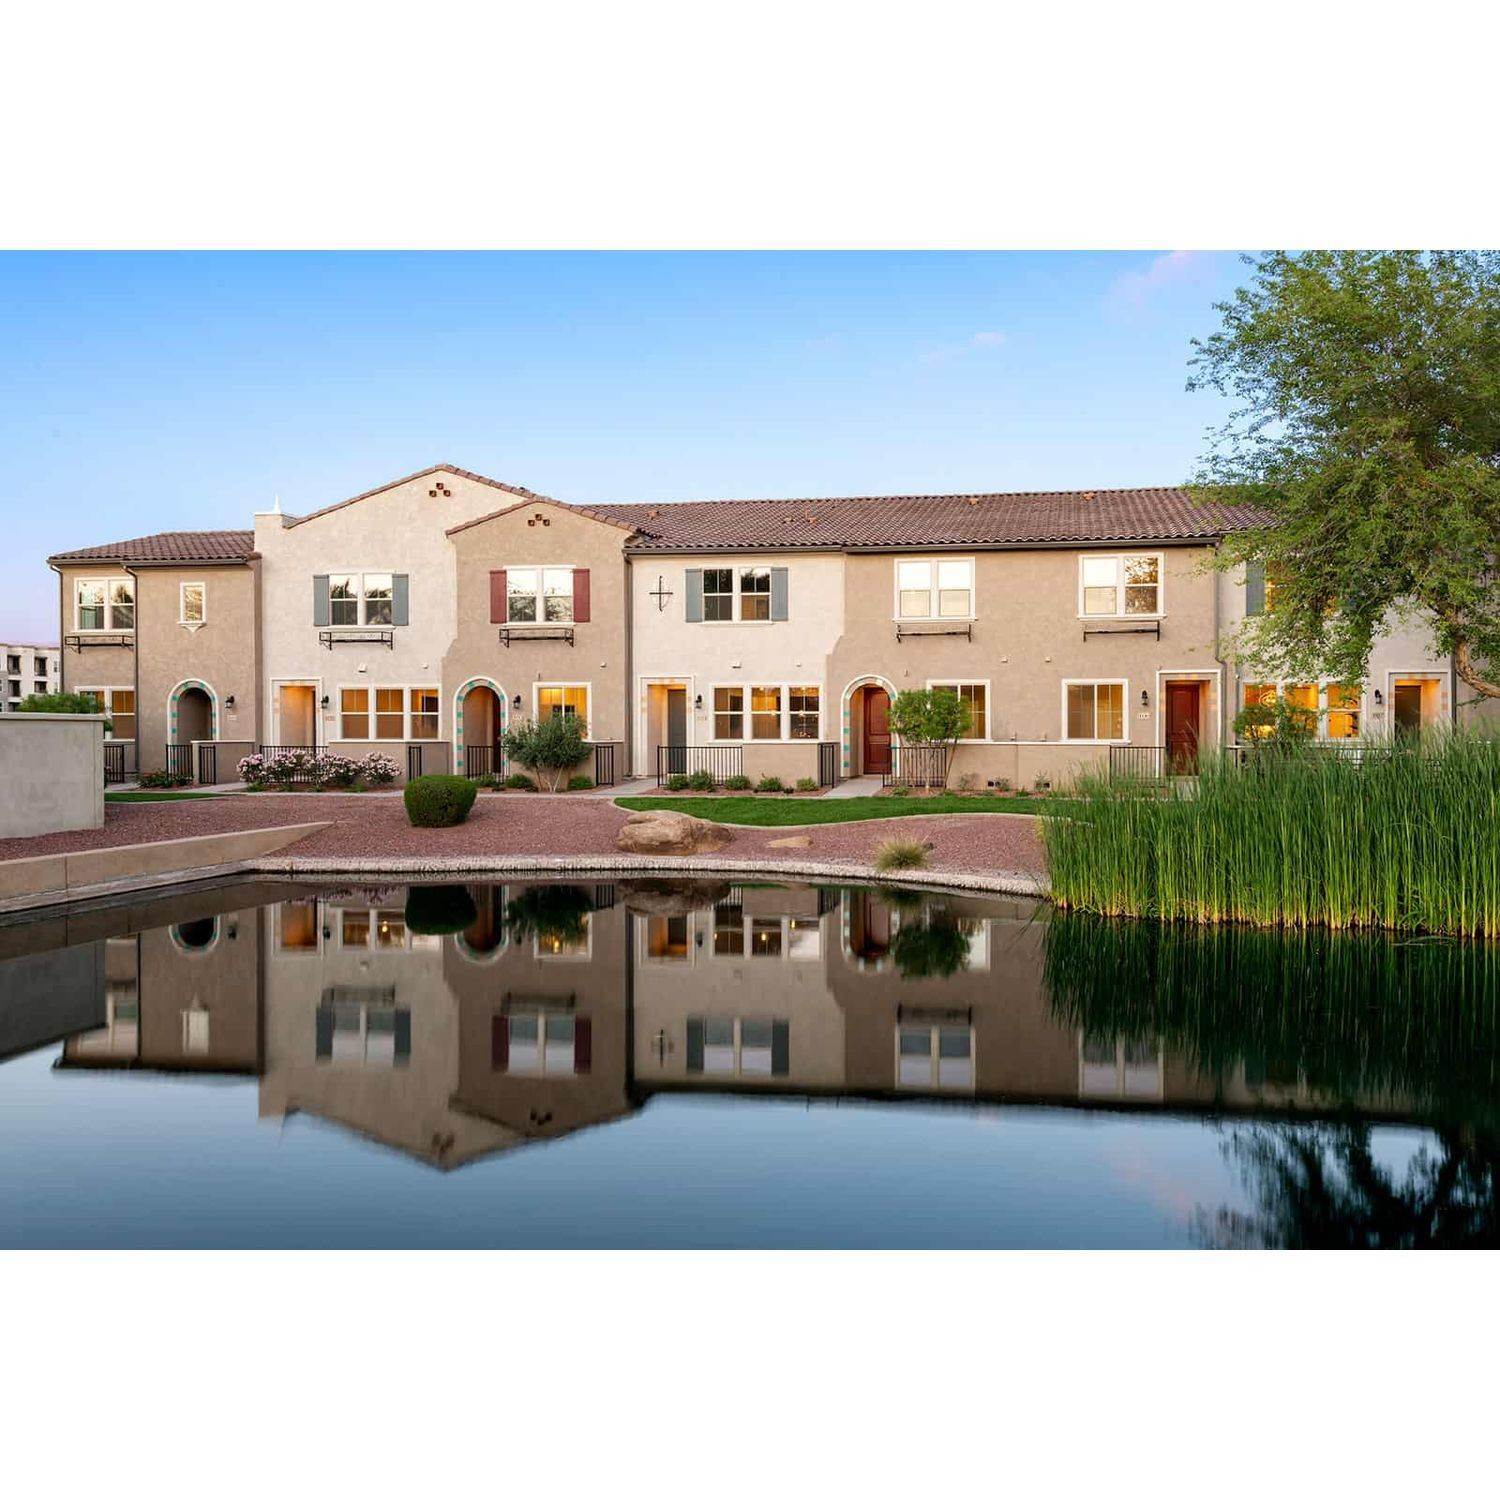 4. The Towns at Annecy xây dựng tại 2660 S. Equestrian Dr. #110, Gilbert, AZ 85295